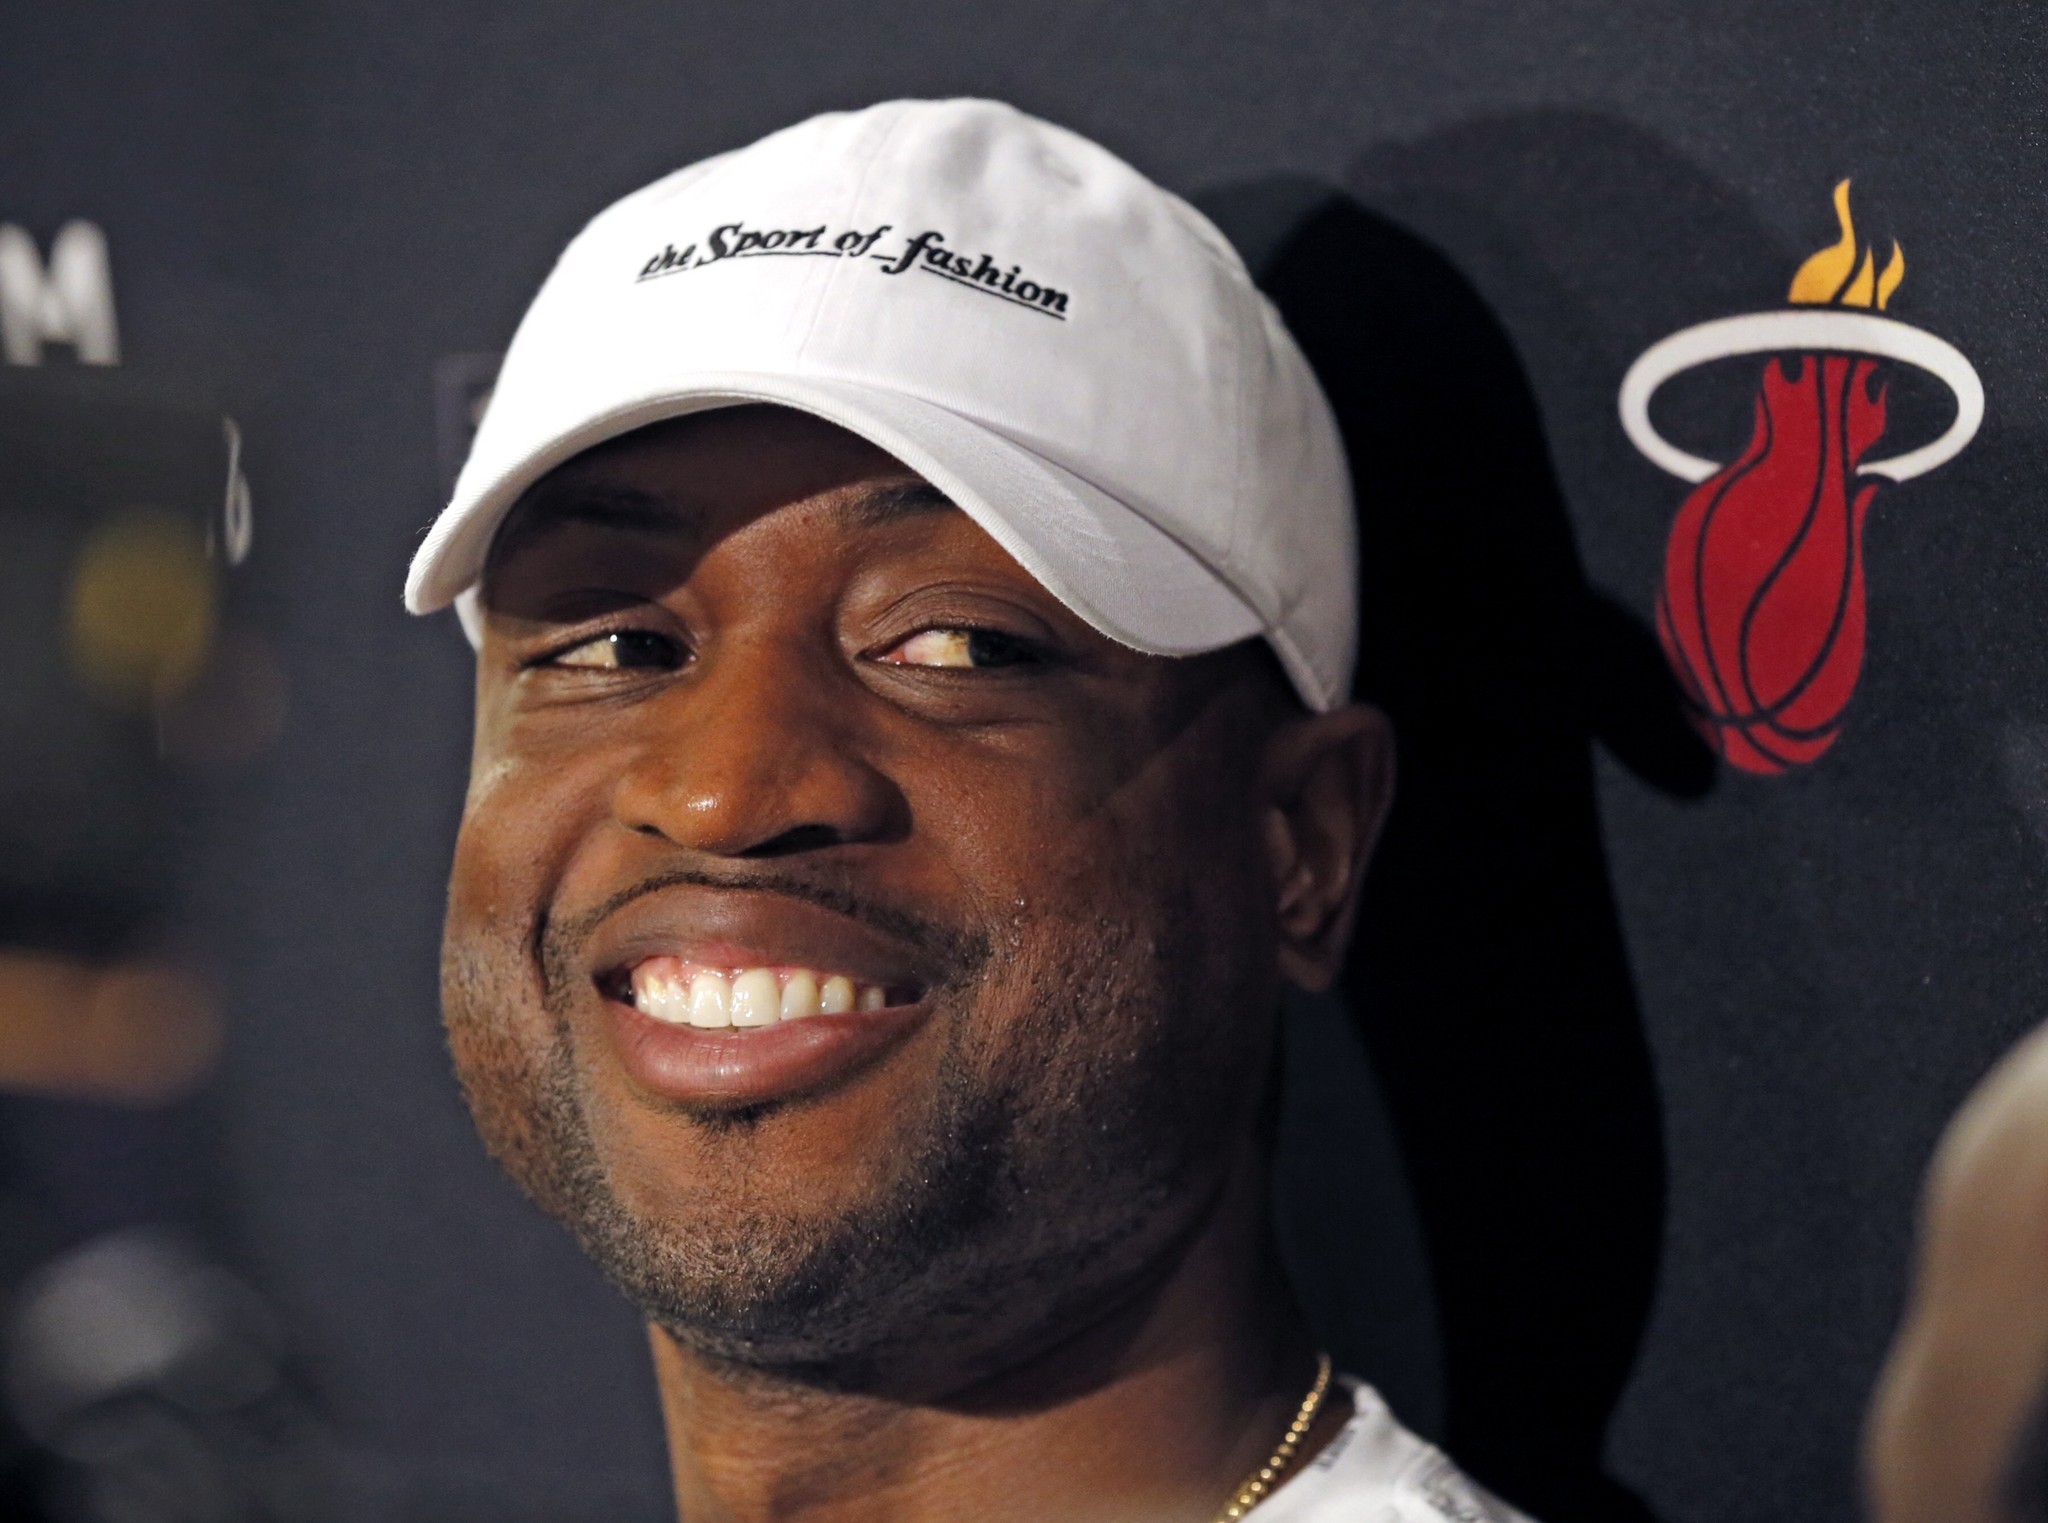 Twitter reacts to Dwyane Wade's Chicago homecoming - Chicago Tribune2048 x 1523